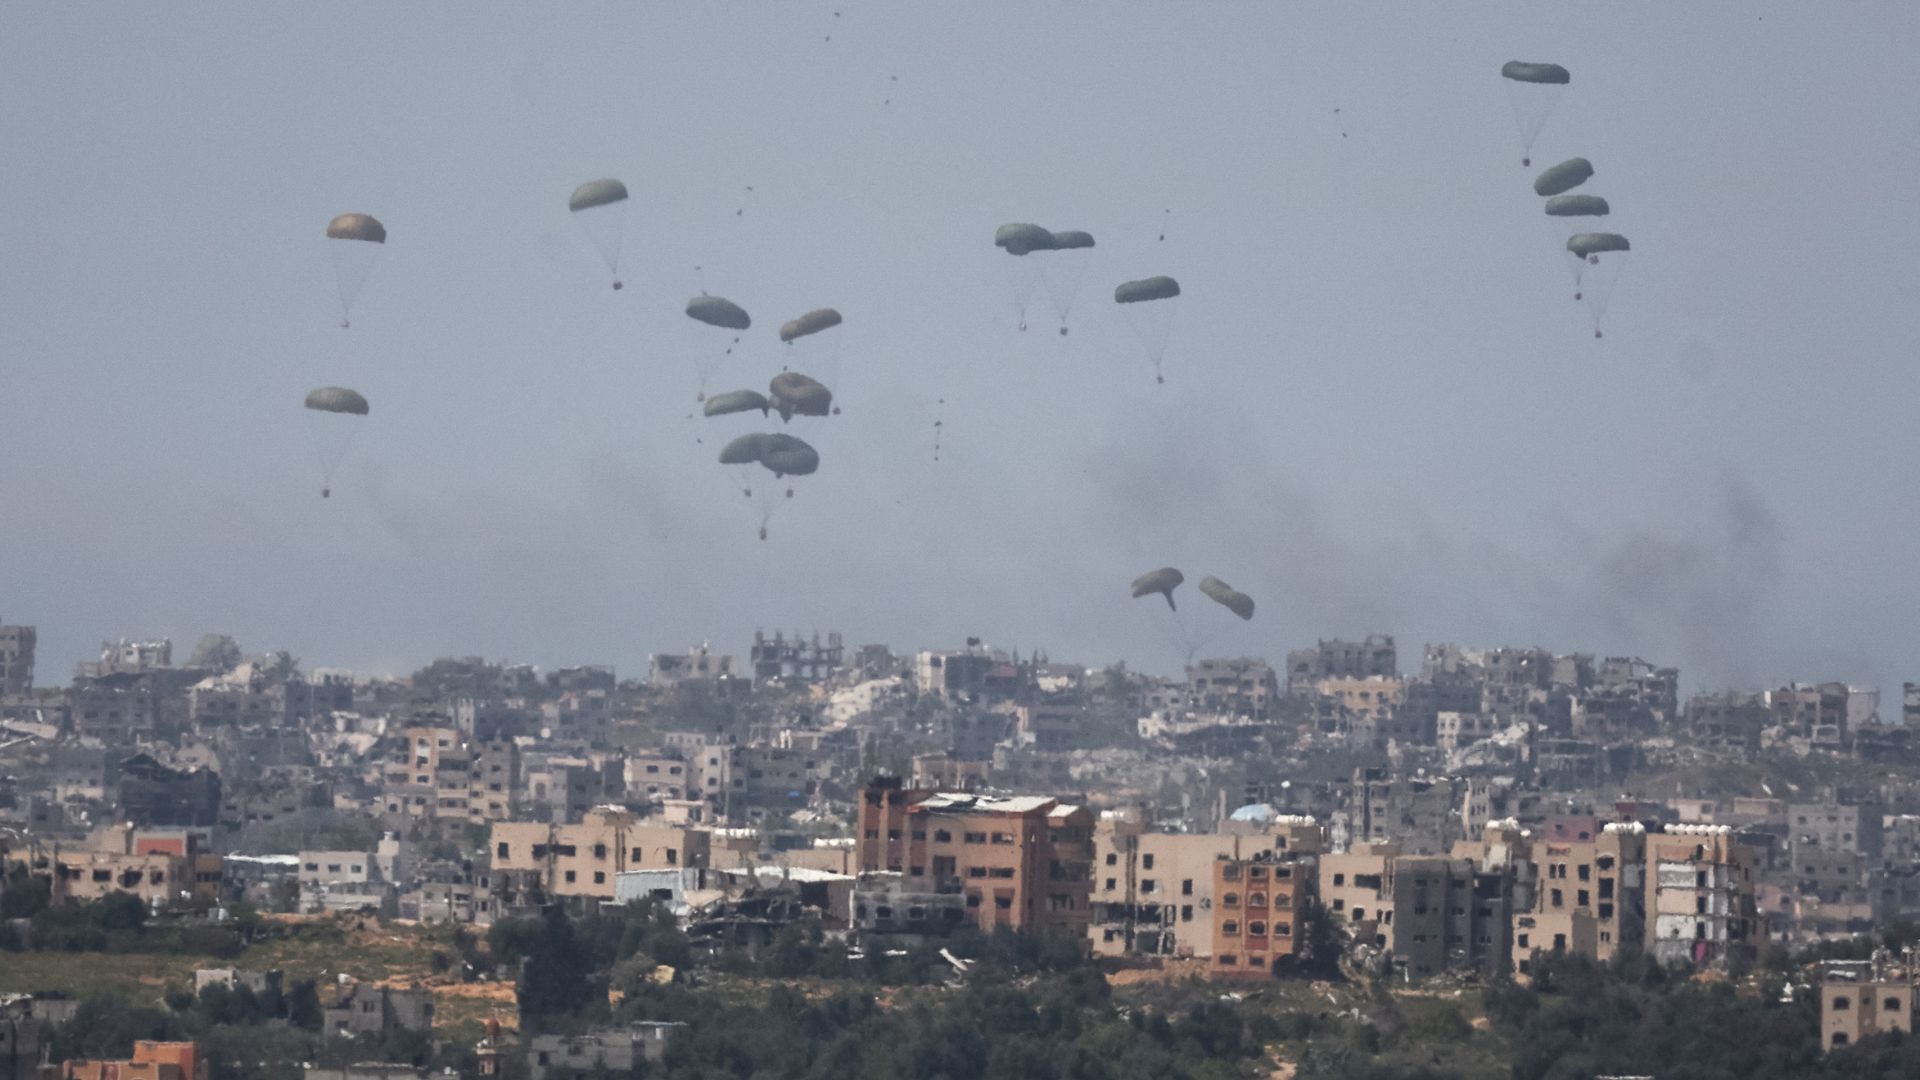 Humanitarian aid packages fall through the sky towards the Gaza Strip after being dropped from an aircraft. /Ronen Zvulun/Reuters